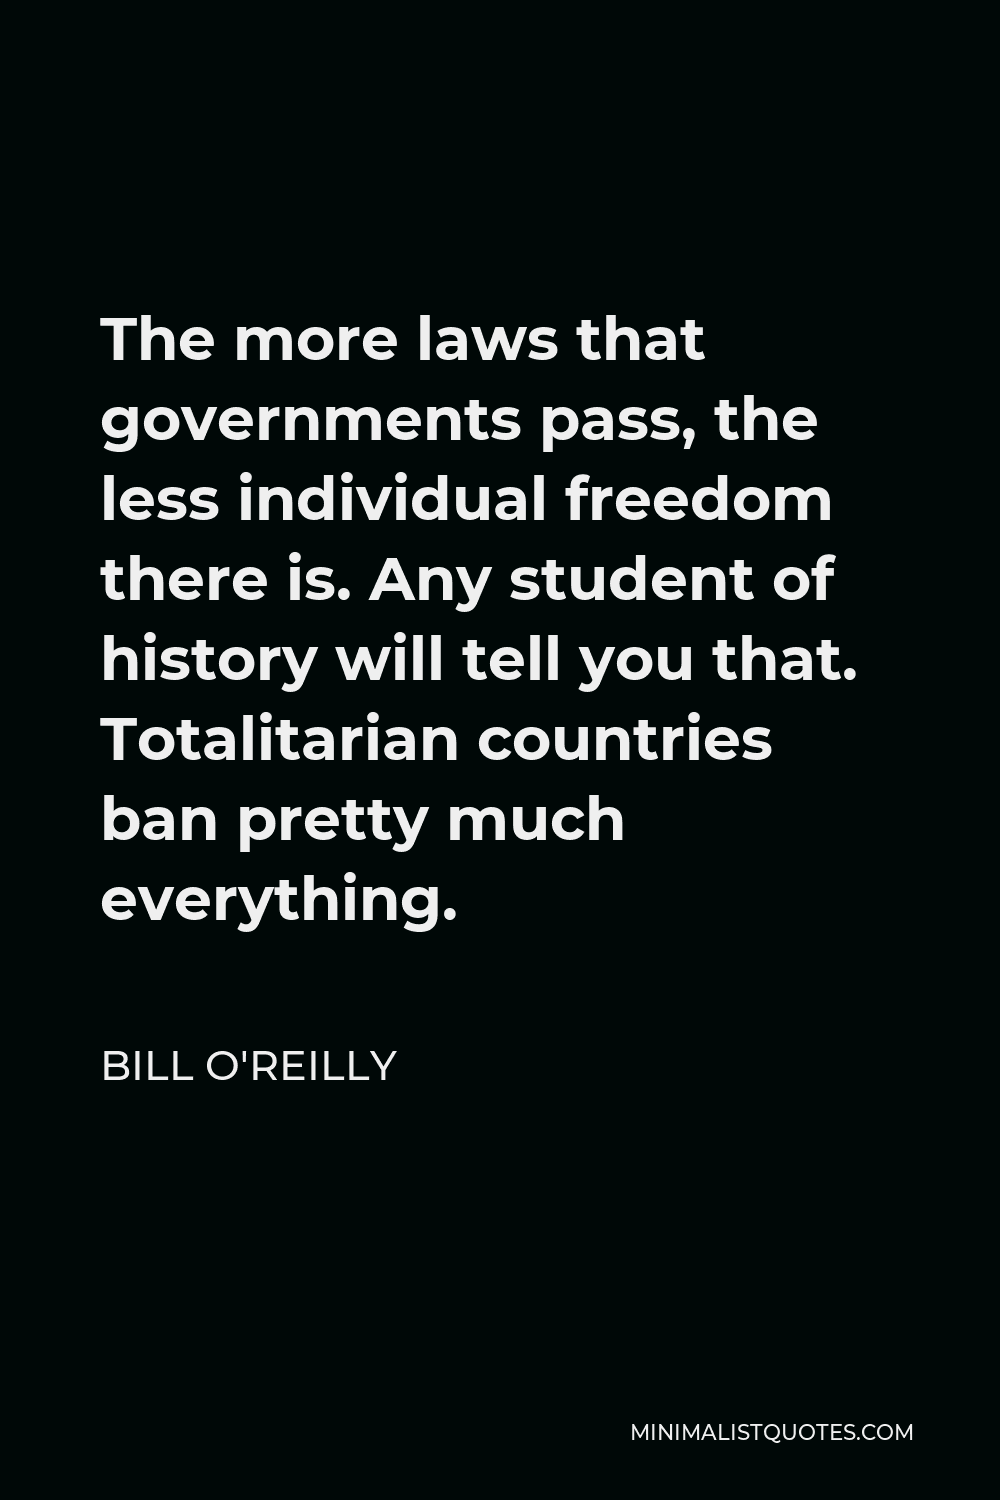 Bill O'Reilly Quote - The more laws that governments pass, the less individual freedom there is. Any student of history will tell you that. Totalitarian countries ban pretty much everything.